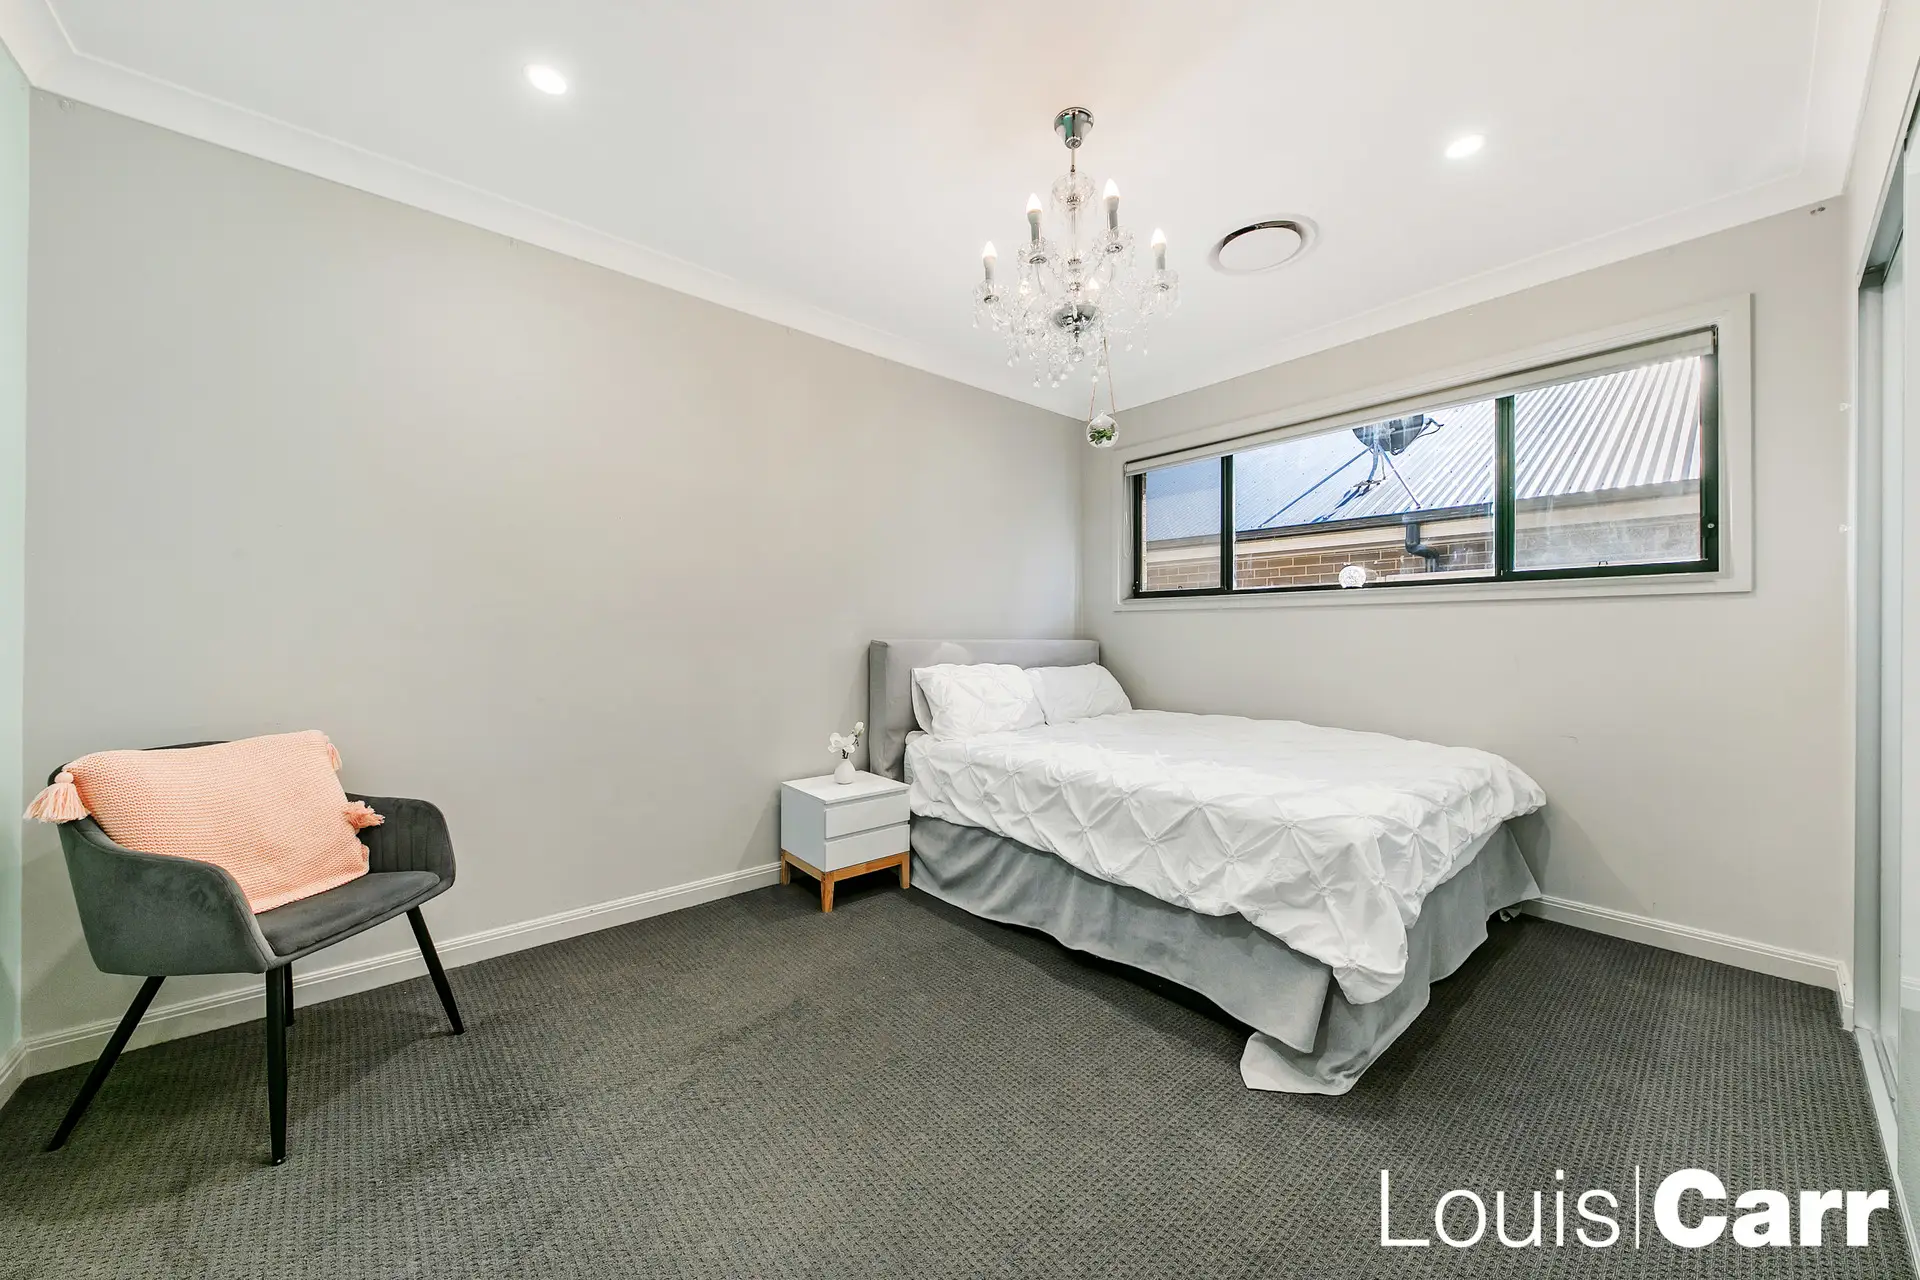 Photo #9: 11 Stynes Avenue, North Kellyville - Sold by Louis Carr Real Estate